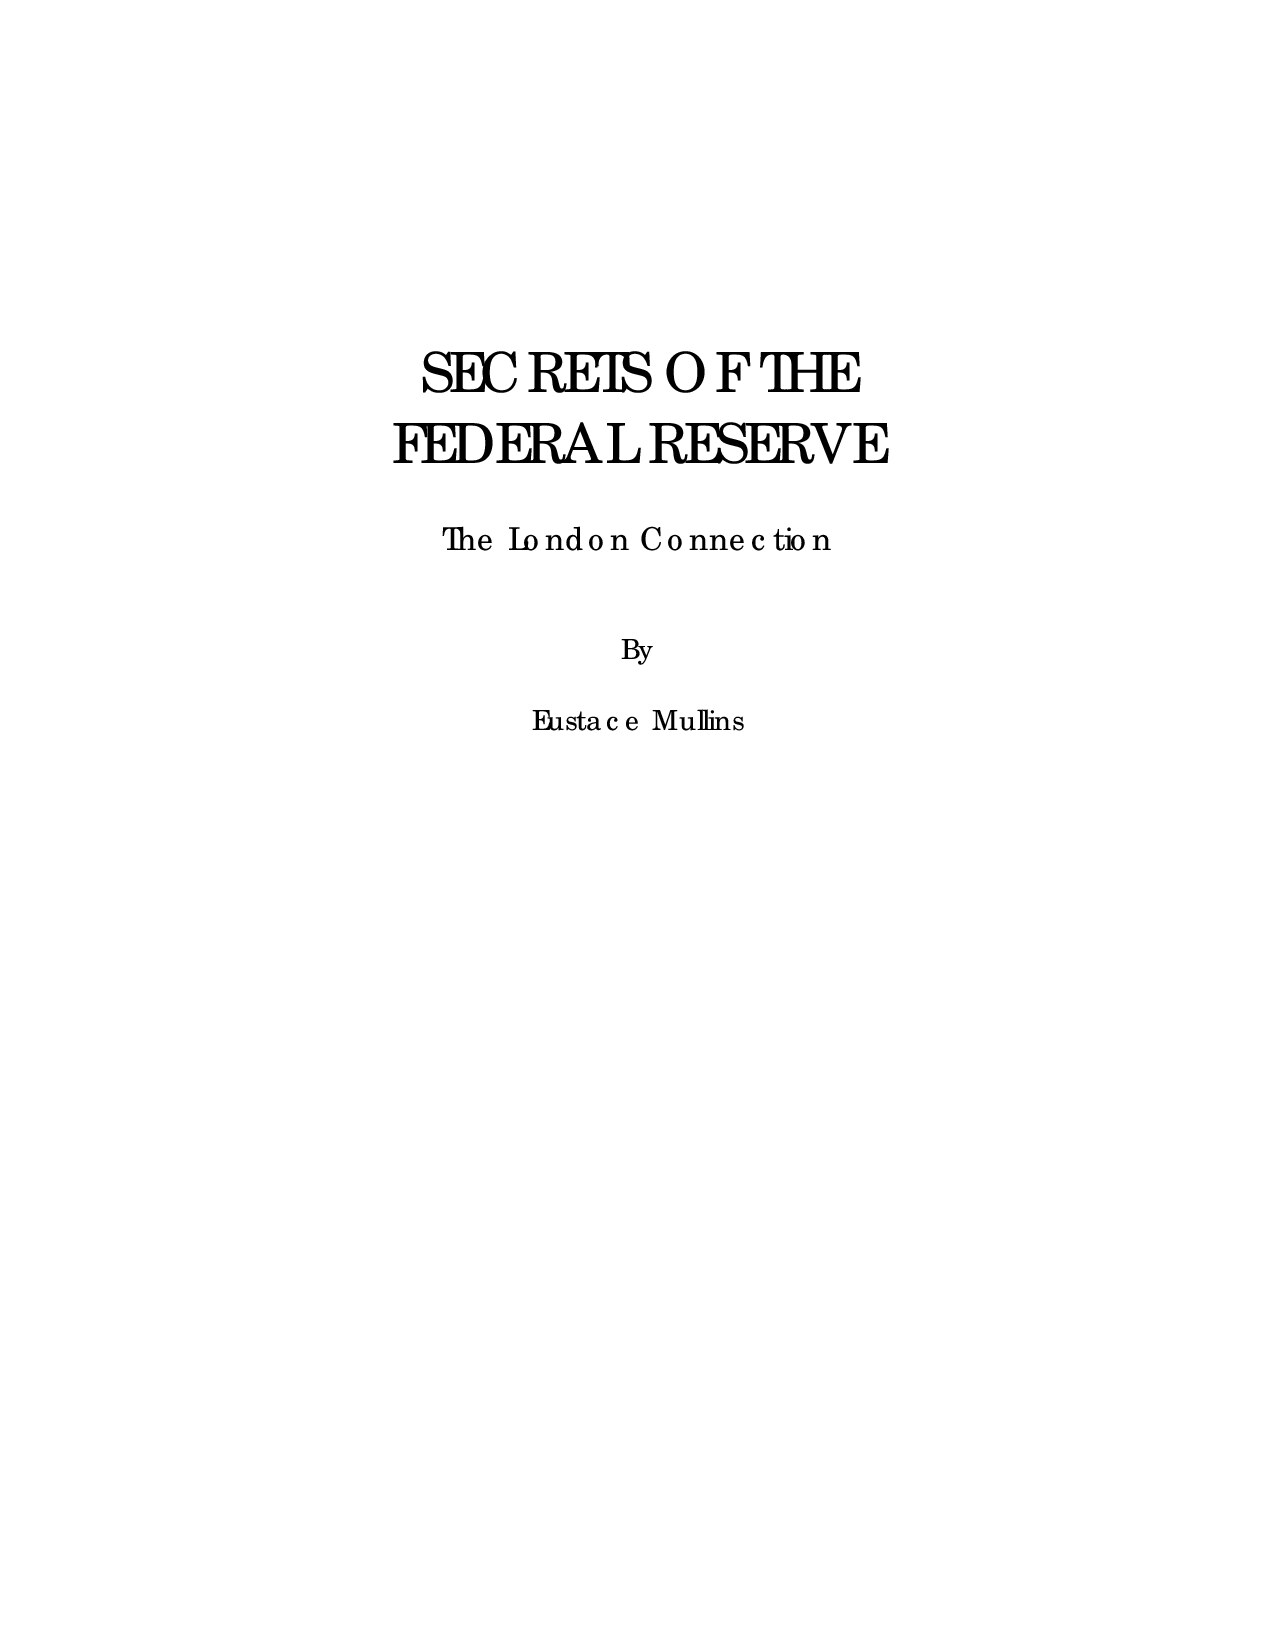 Secrets Of The Federal Reserve